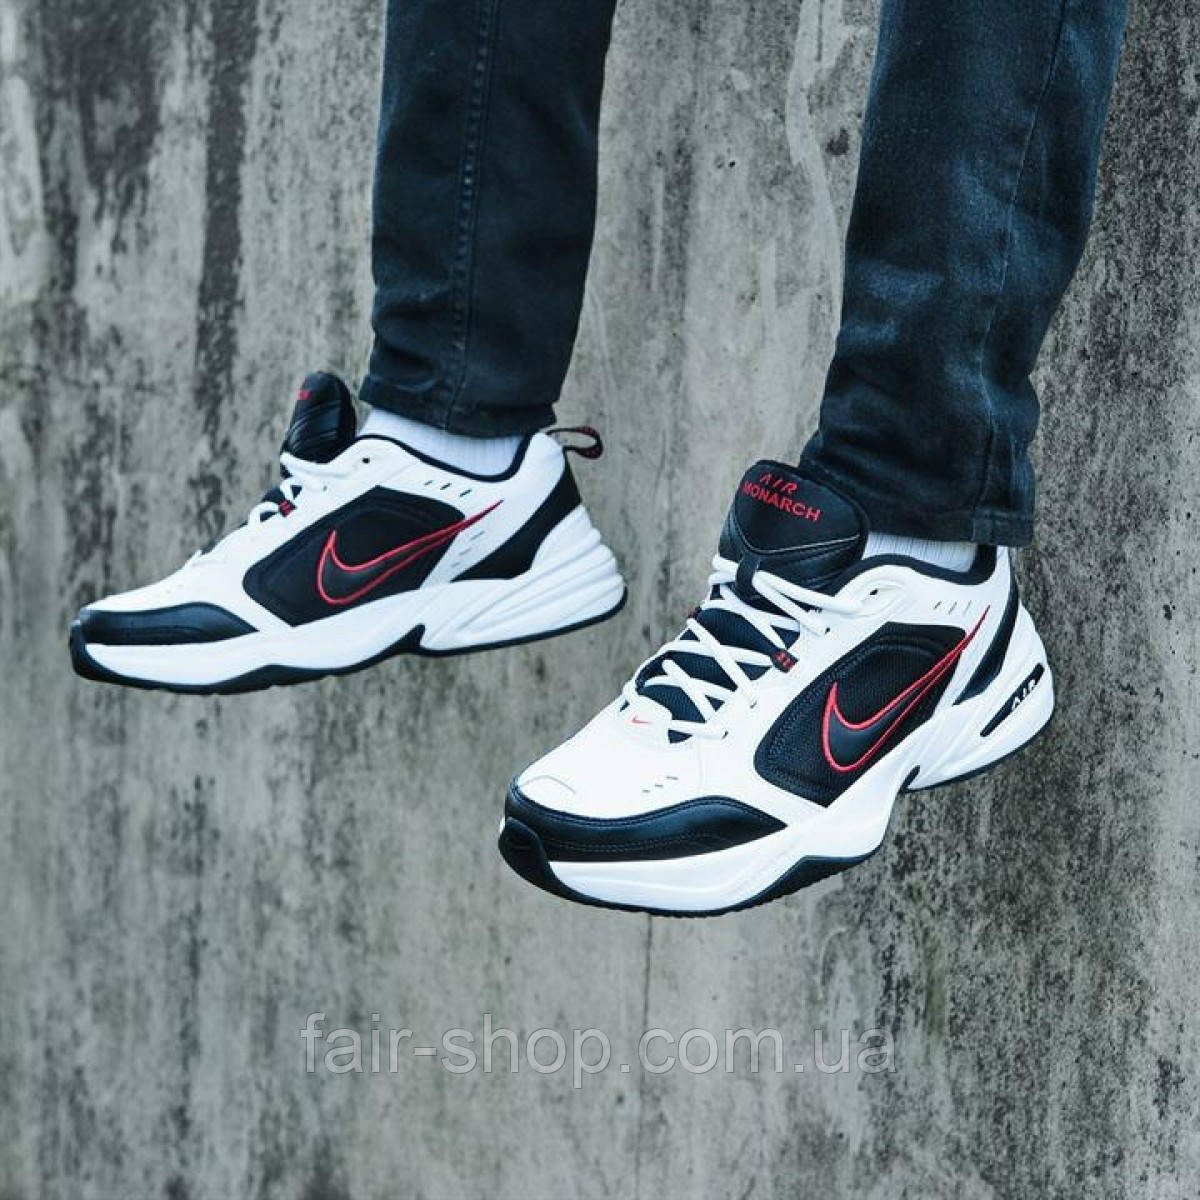 nike air monarch red and black